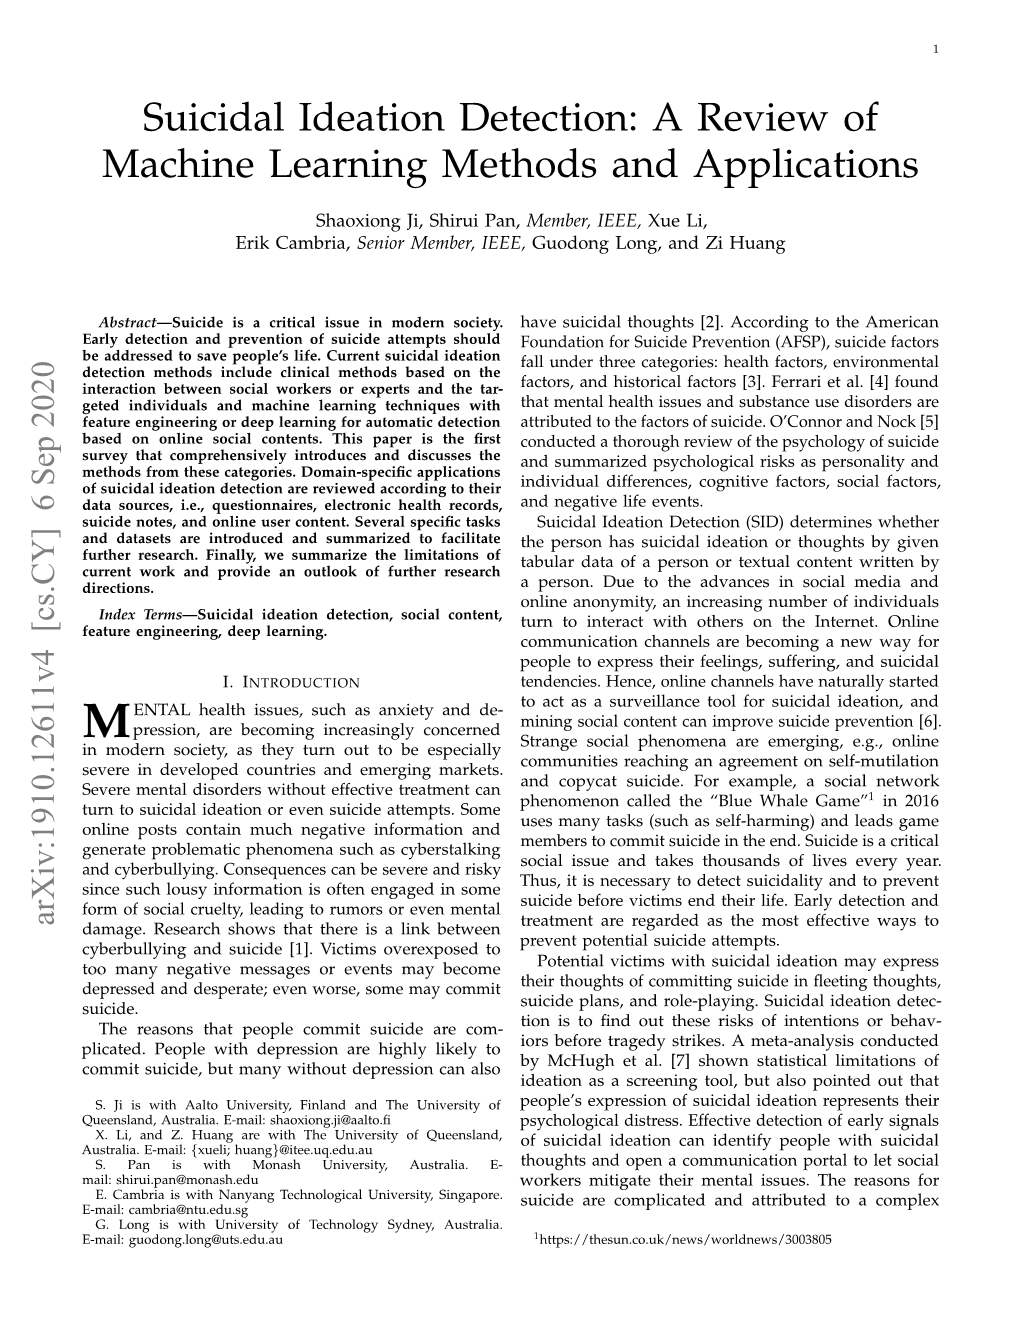 Suicidal Ideation Detection: a Review of Machine Learning Methods and Applications